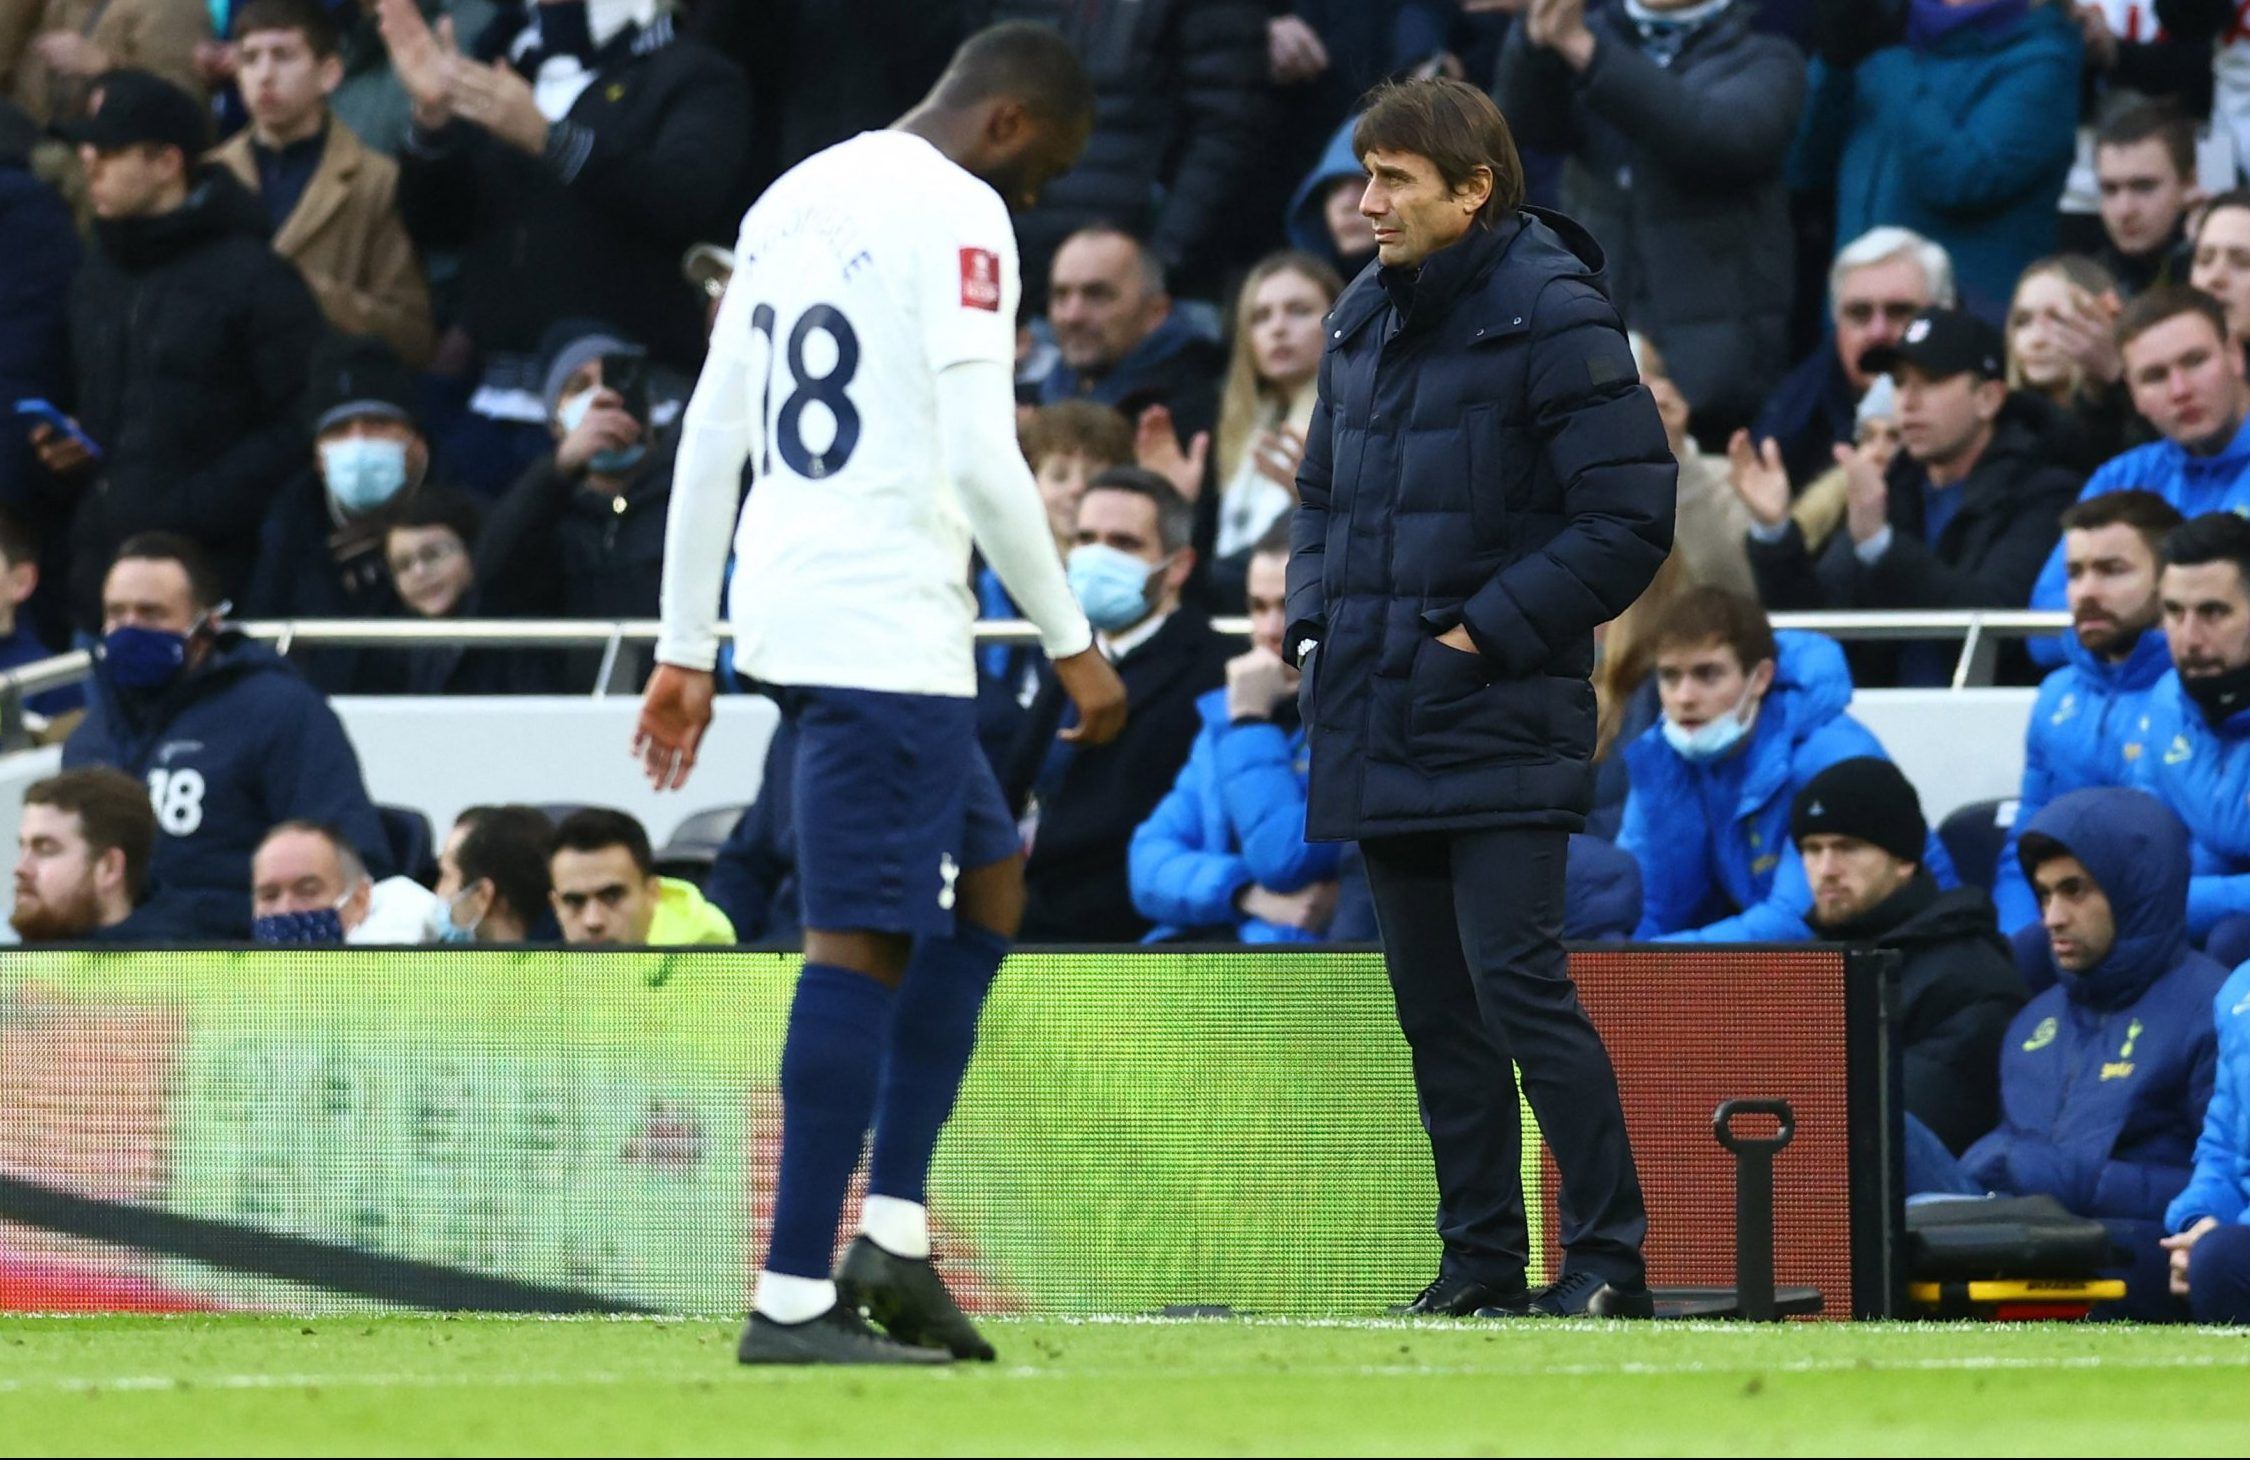 Spurs midfielder Tanguy Ndombele walks off after being substituted by Antonio Conte